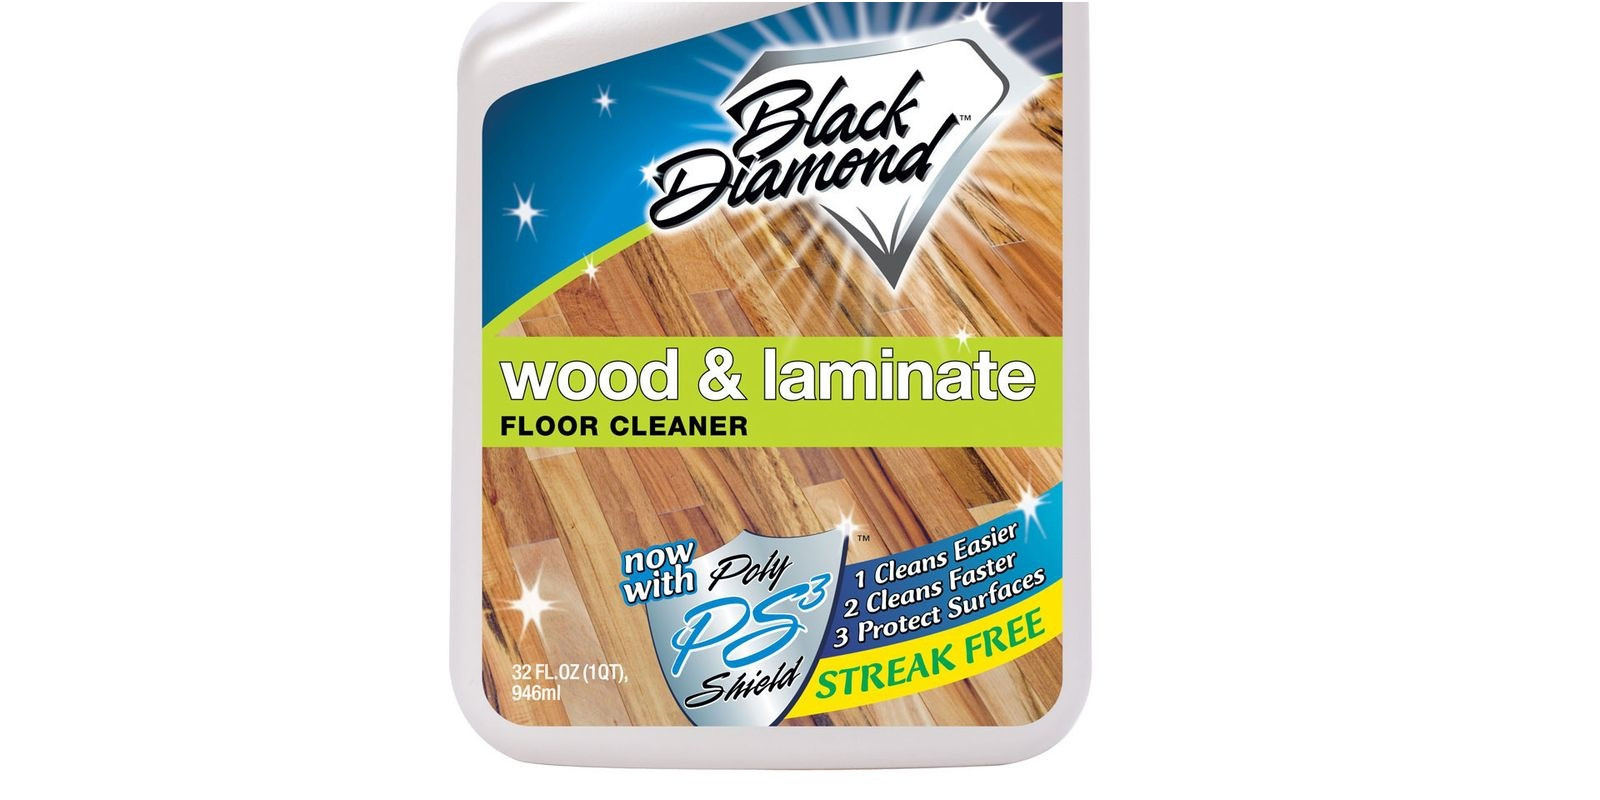 17 Nice Hardwood Floor Cleaning with White Vinegar 2024 free download hardwood floor cleaning with white vinegar of how to take care of laminate flooring flooring design with regard to floor black diamondod and laminate floor cleaner review vinegar